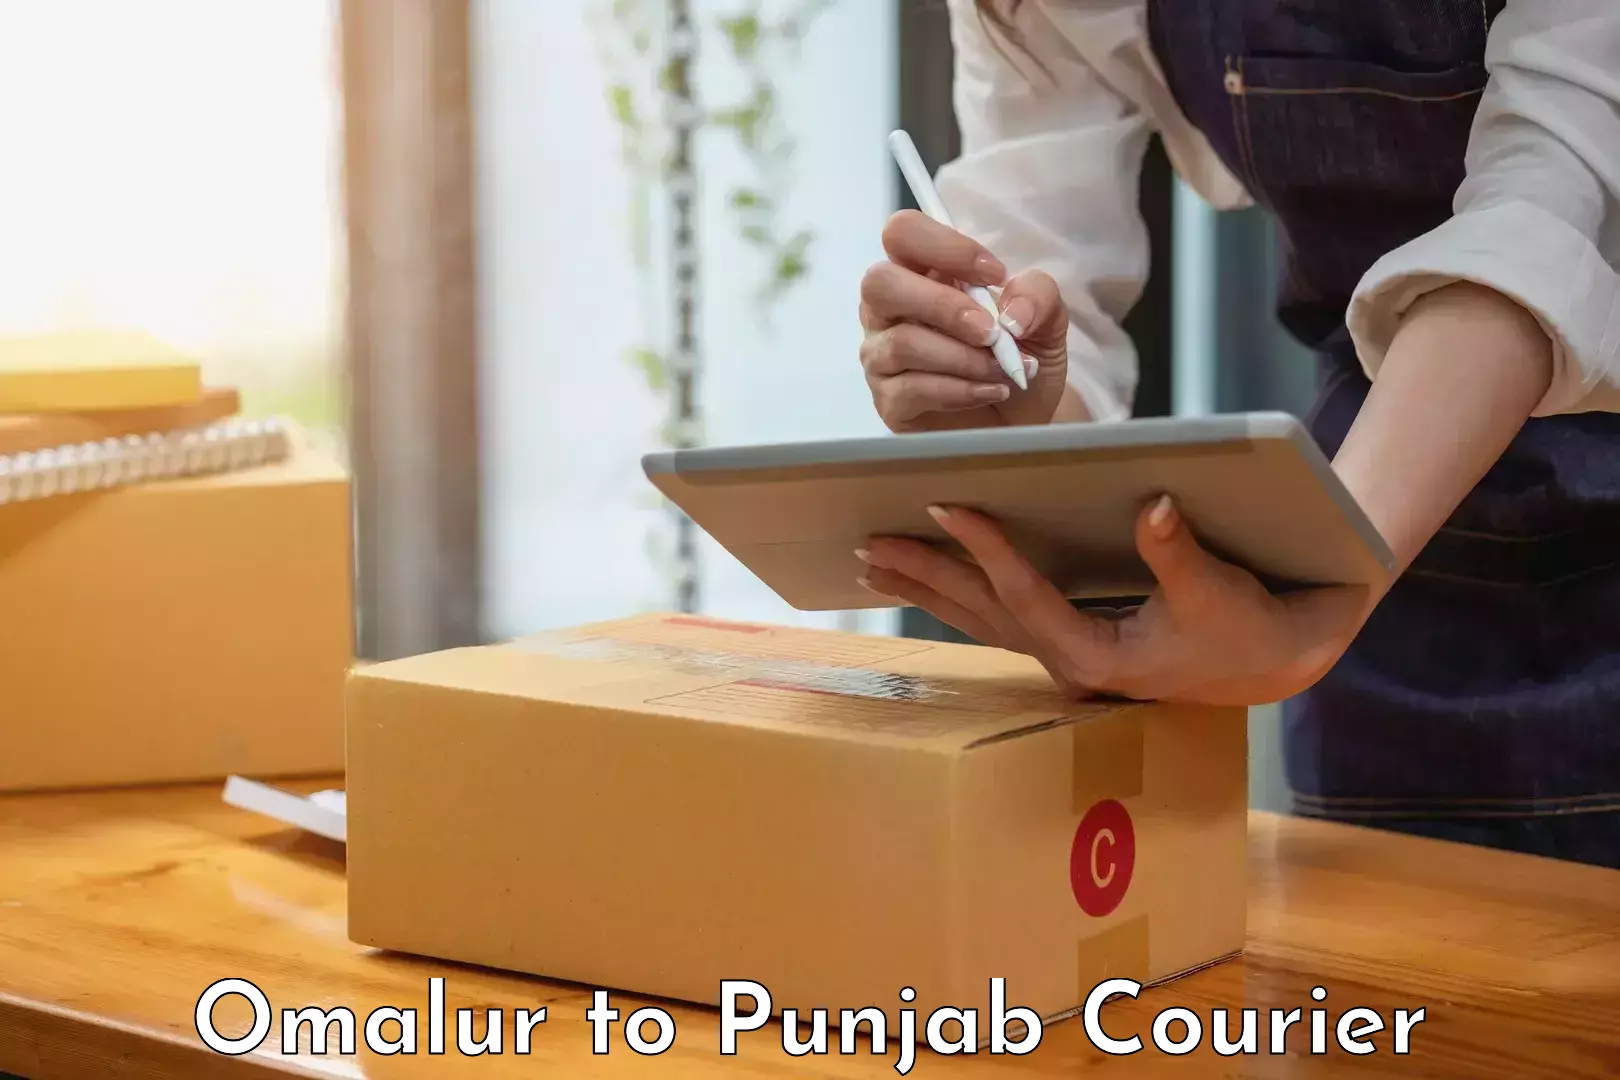 Full-service courier options Omalur to Ludhiana